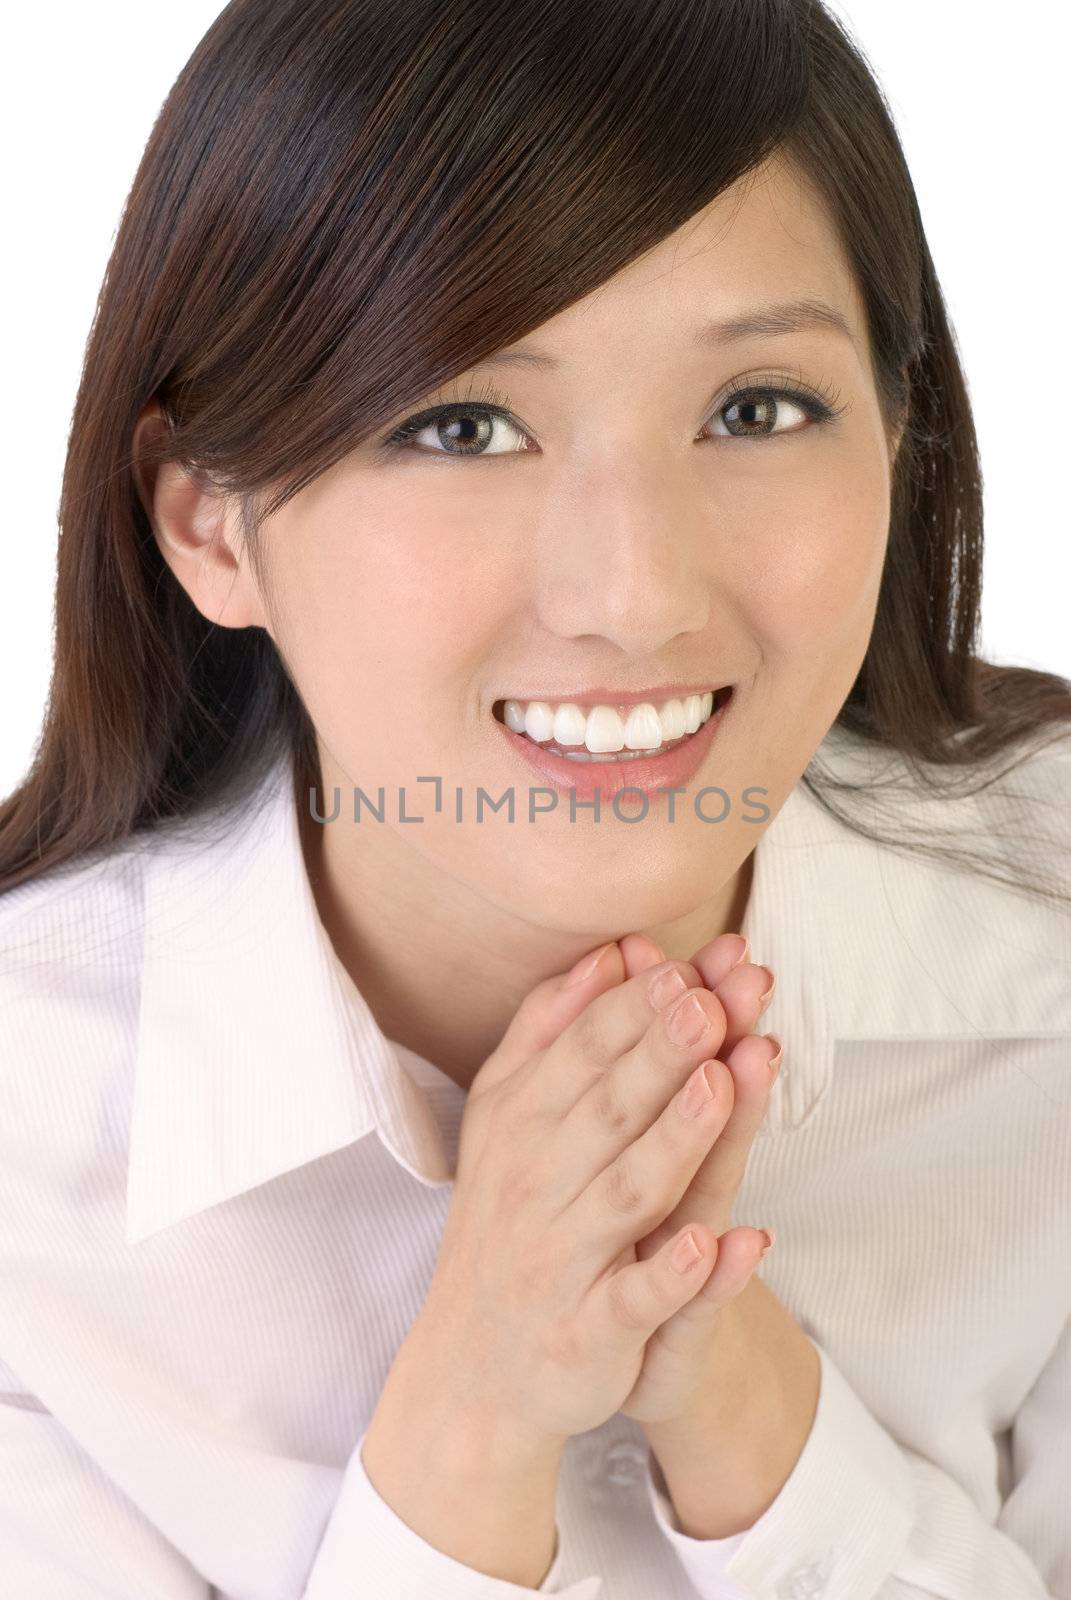 Business woman pray and smile on white background.